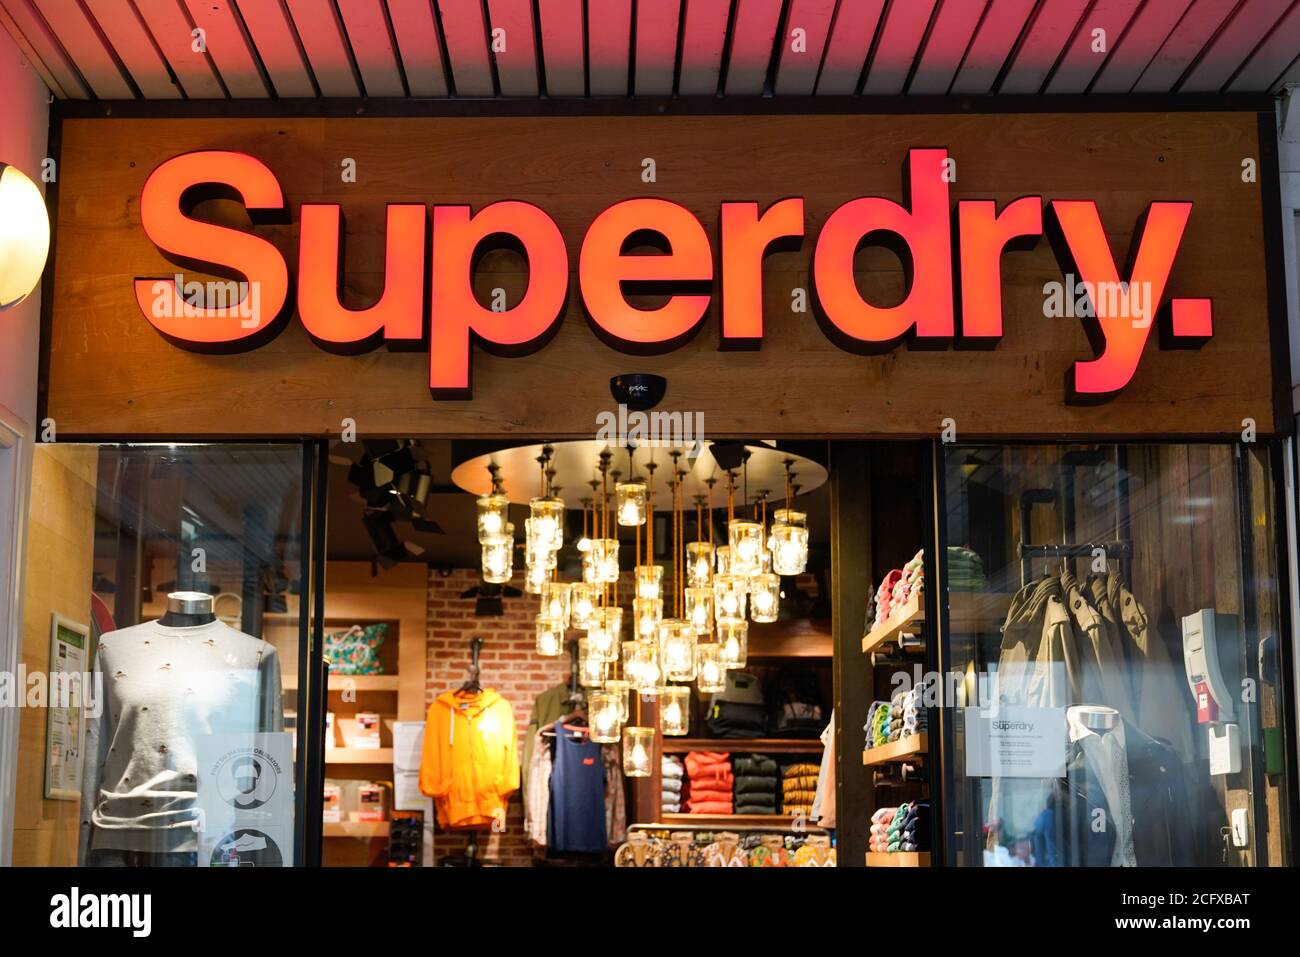 Bordeaux , Aquitaine / France - 09 01 2020 : superdry text sign and logo  front of british shop brand fashion clothing company Stock Photo - Alamy